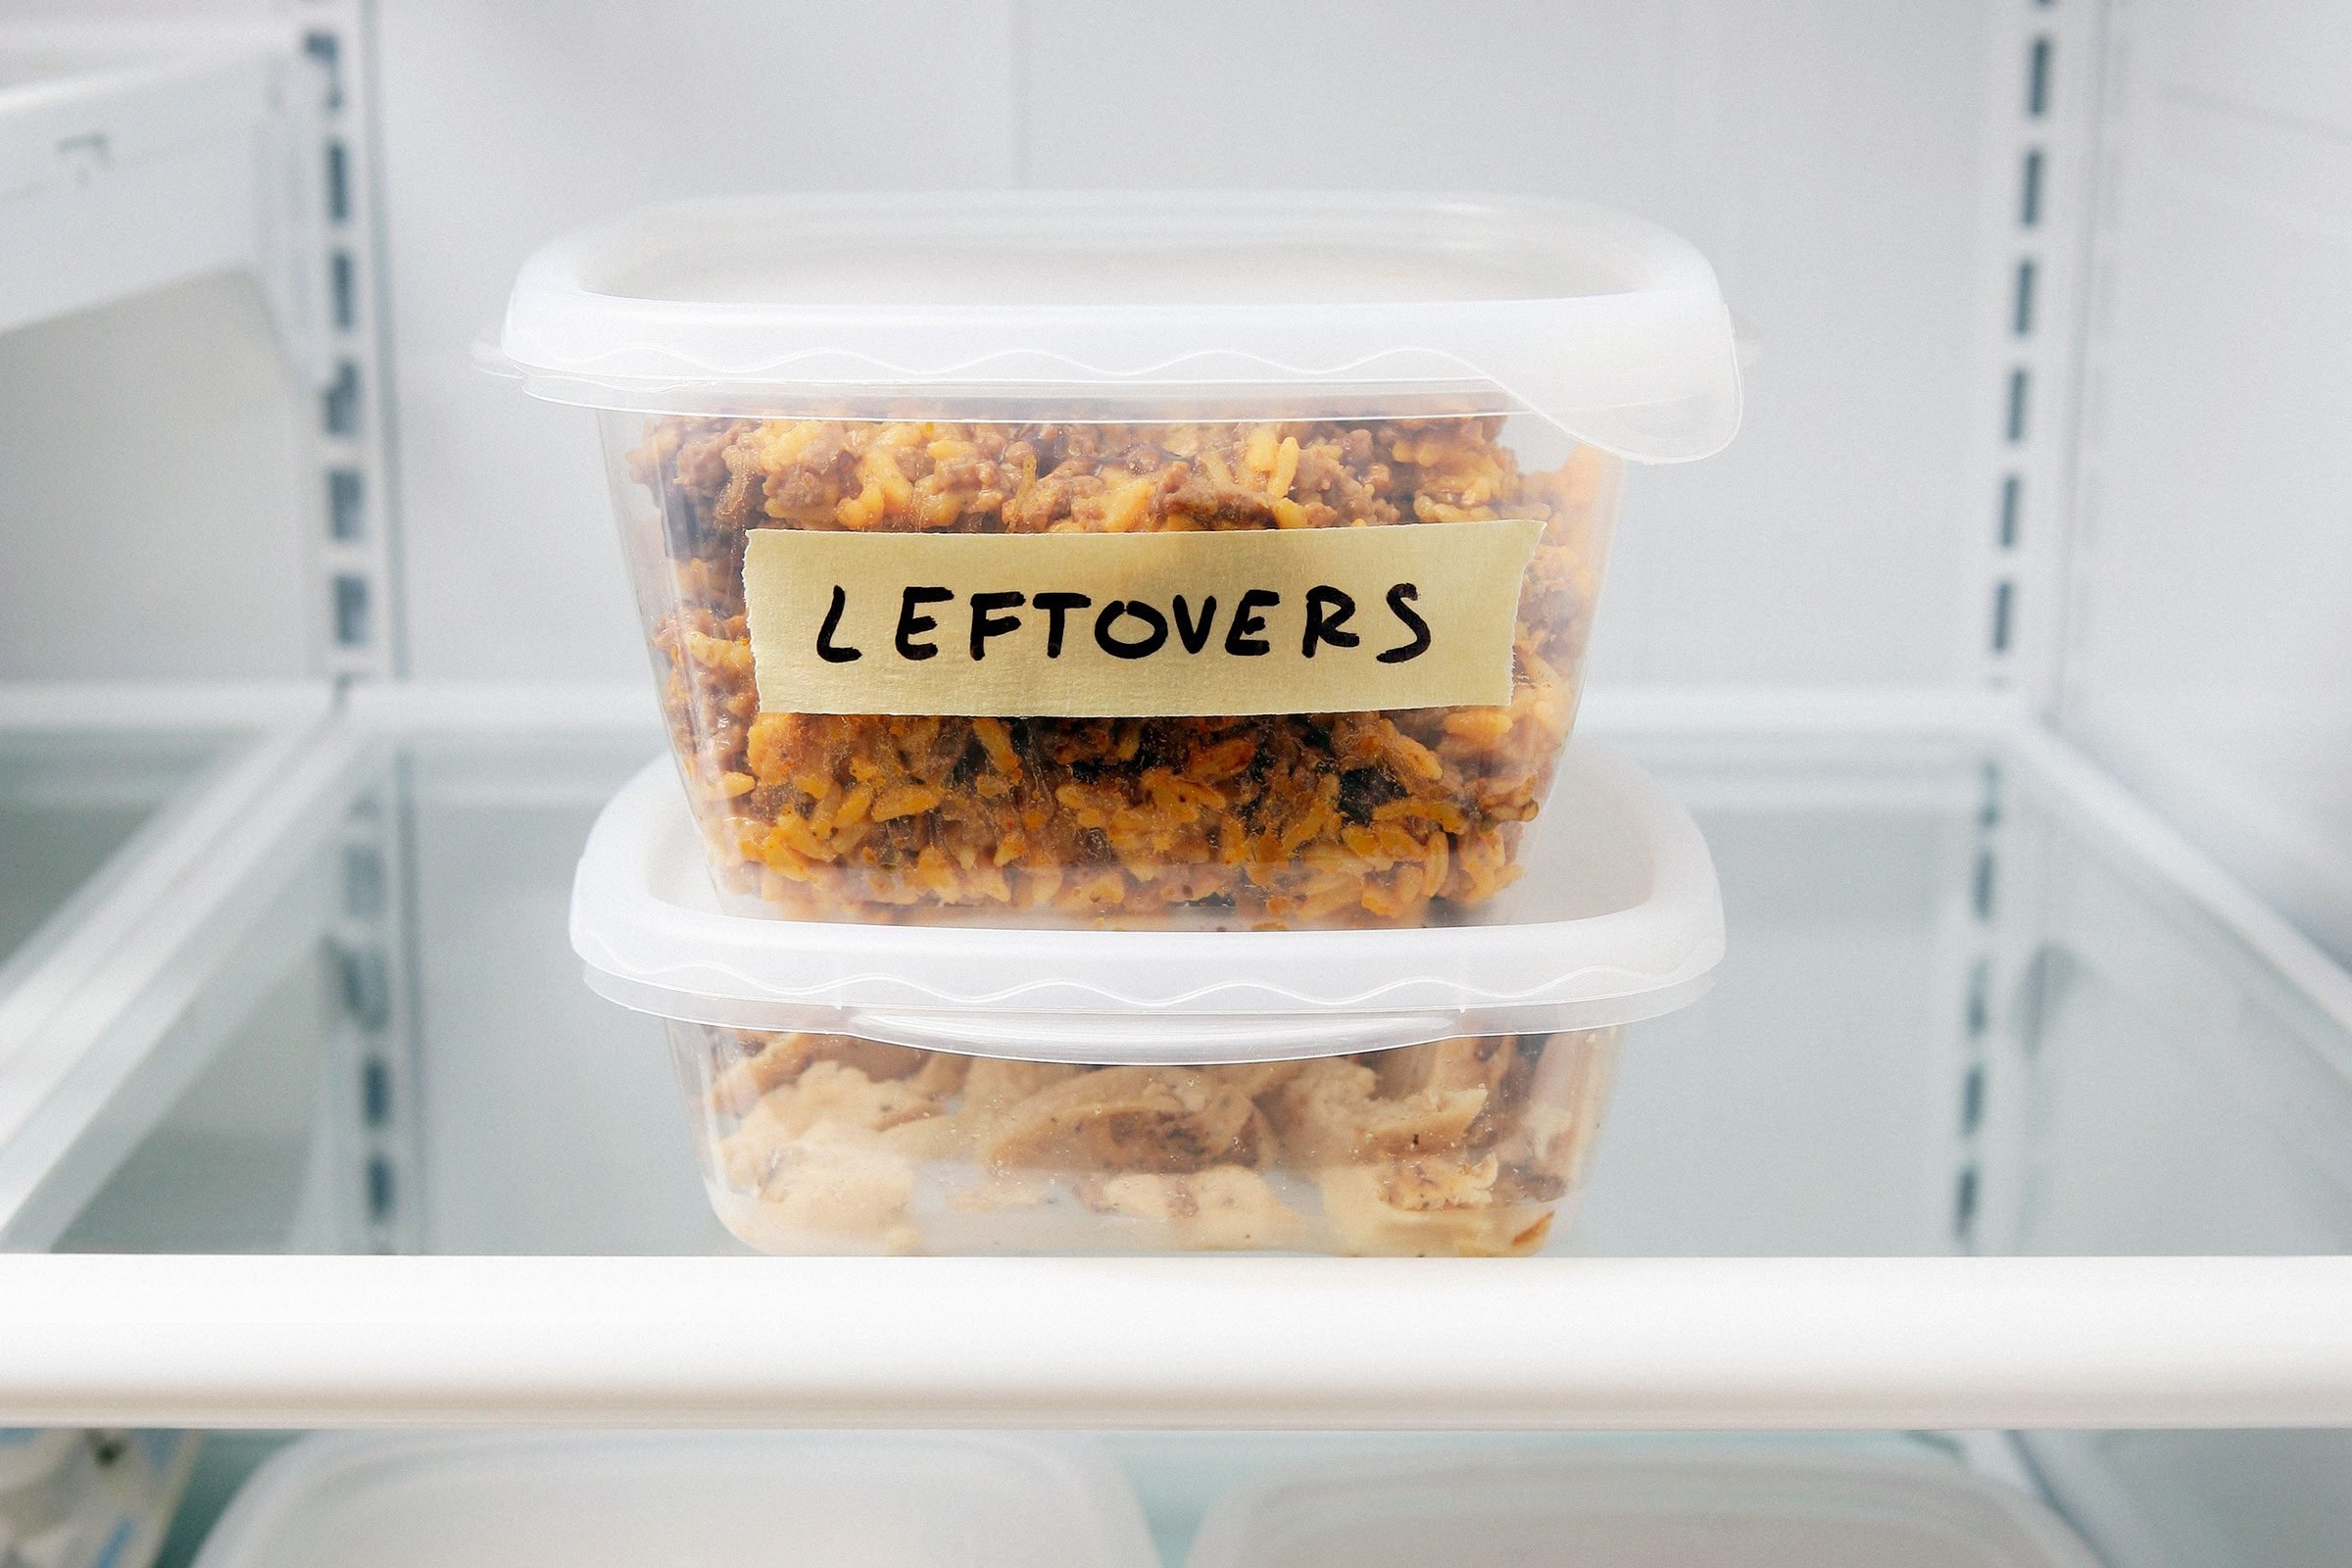 How Long Can Leftovers Last in the Fridge and Freezer?